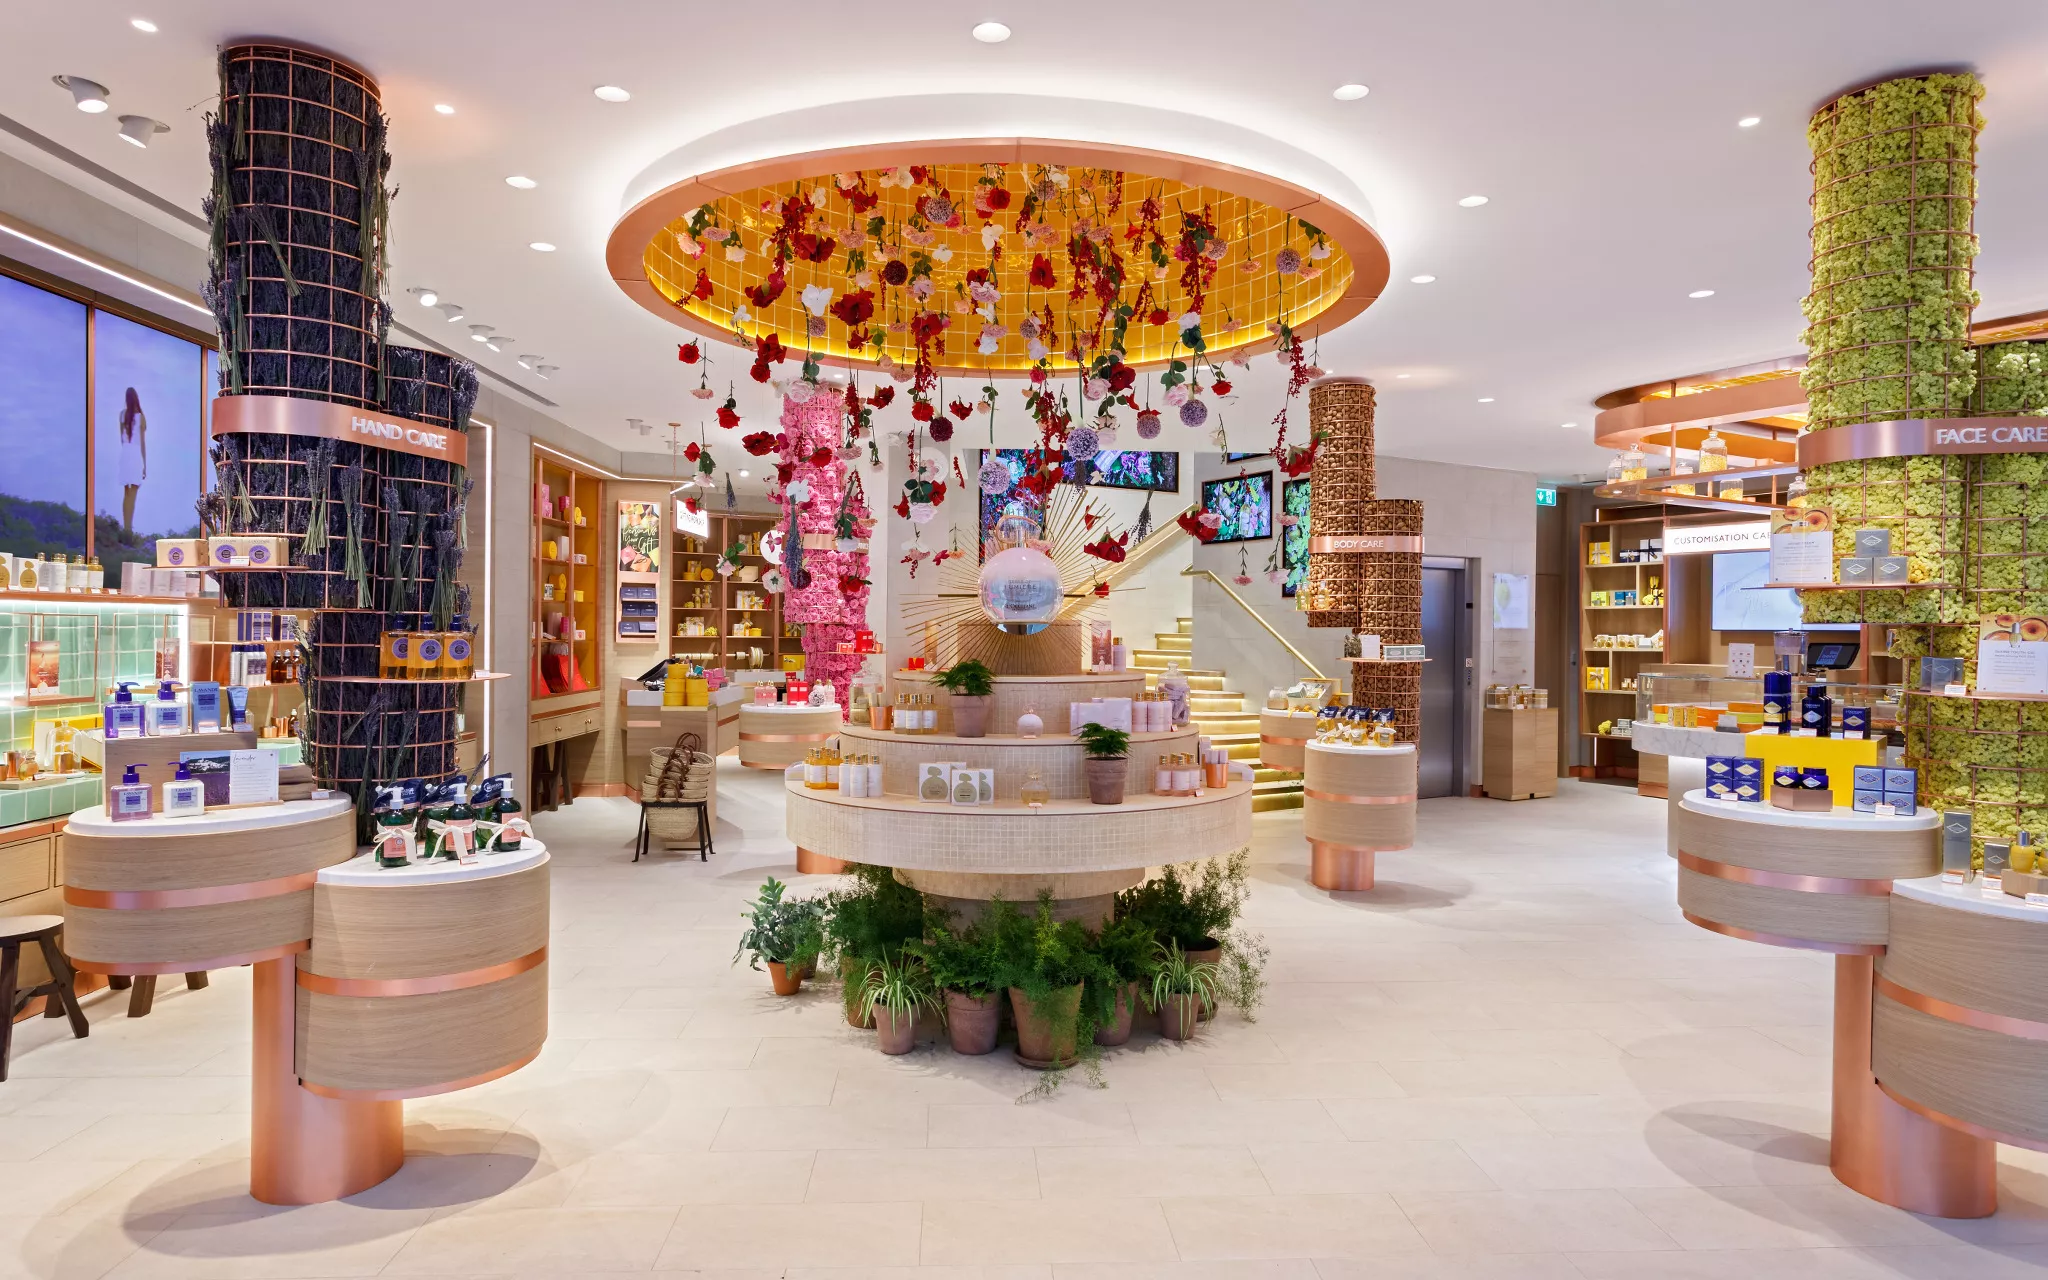 L'Occitane En Provence in Turkey, central_asia | Fragrance,Natural Beauty Products,Cosmetics - Country Helper